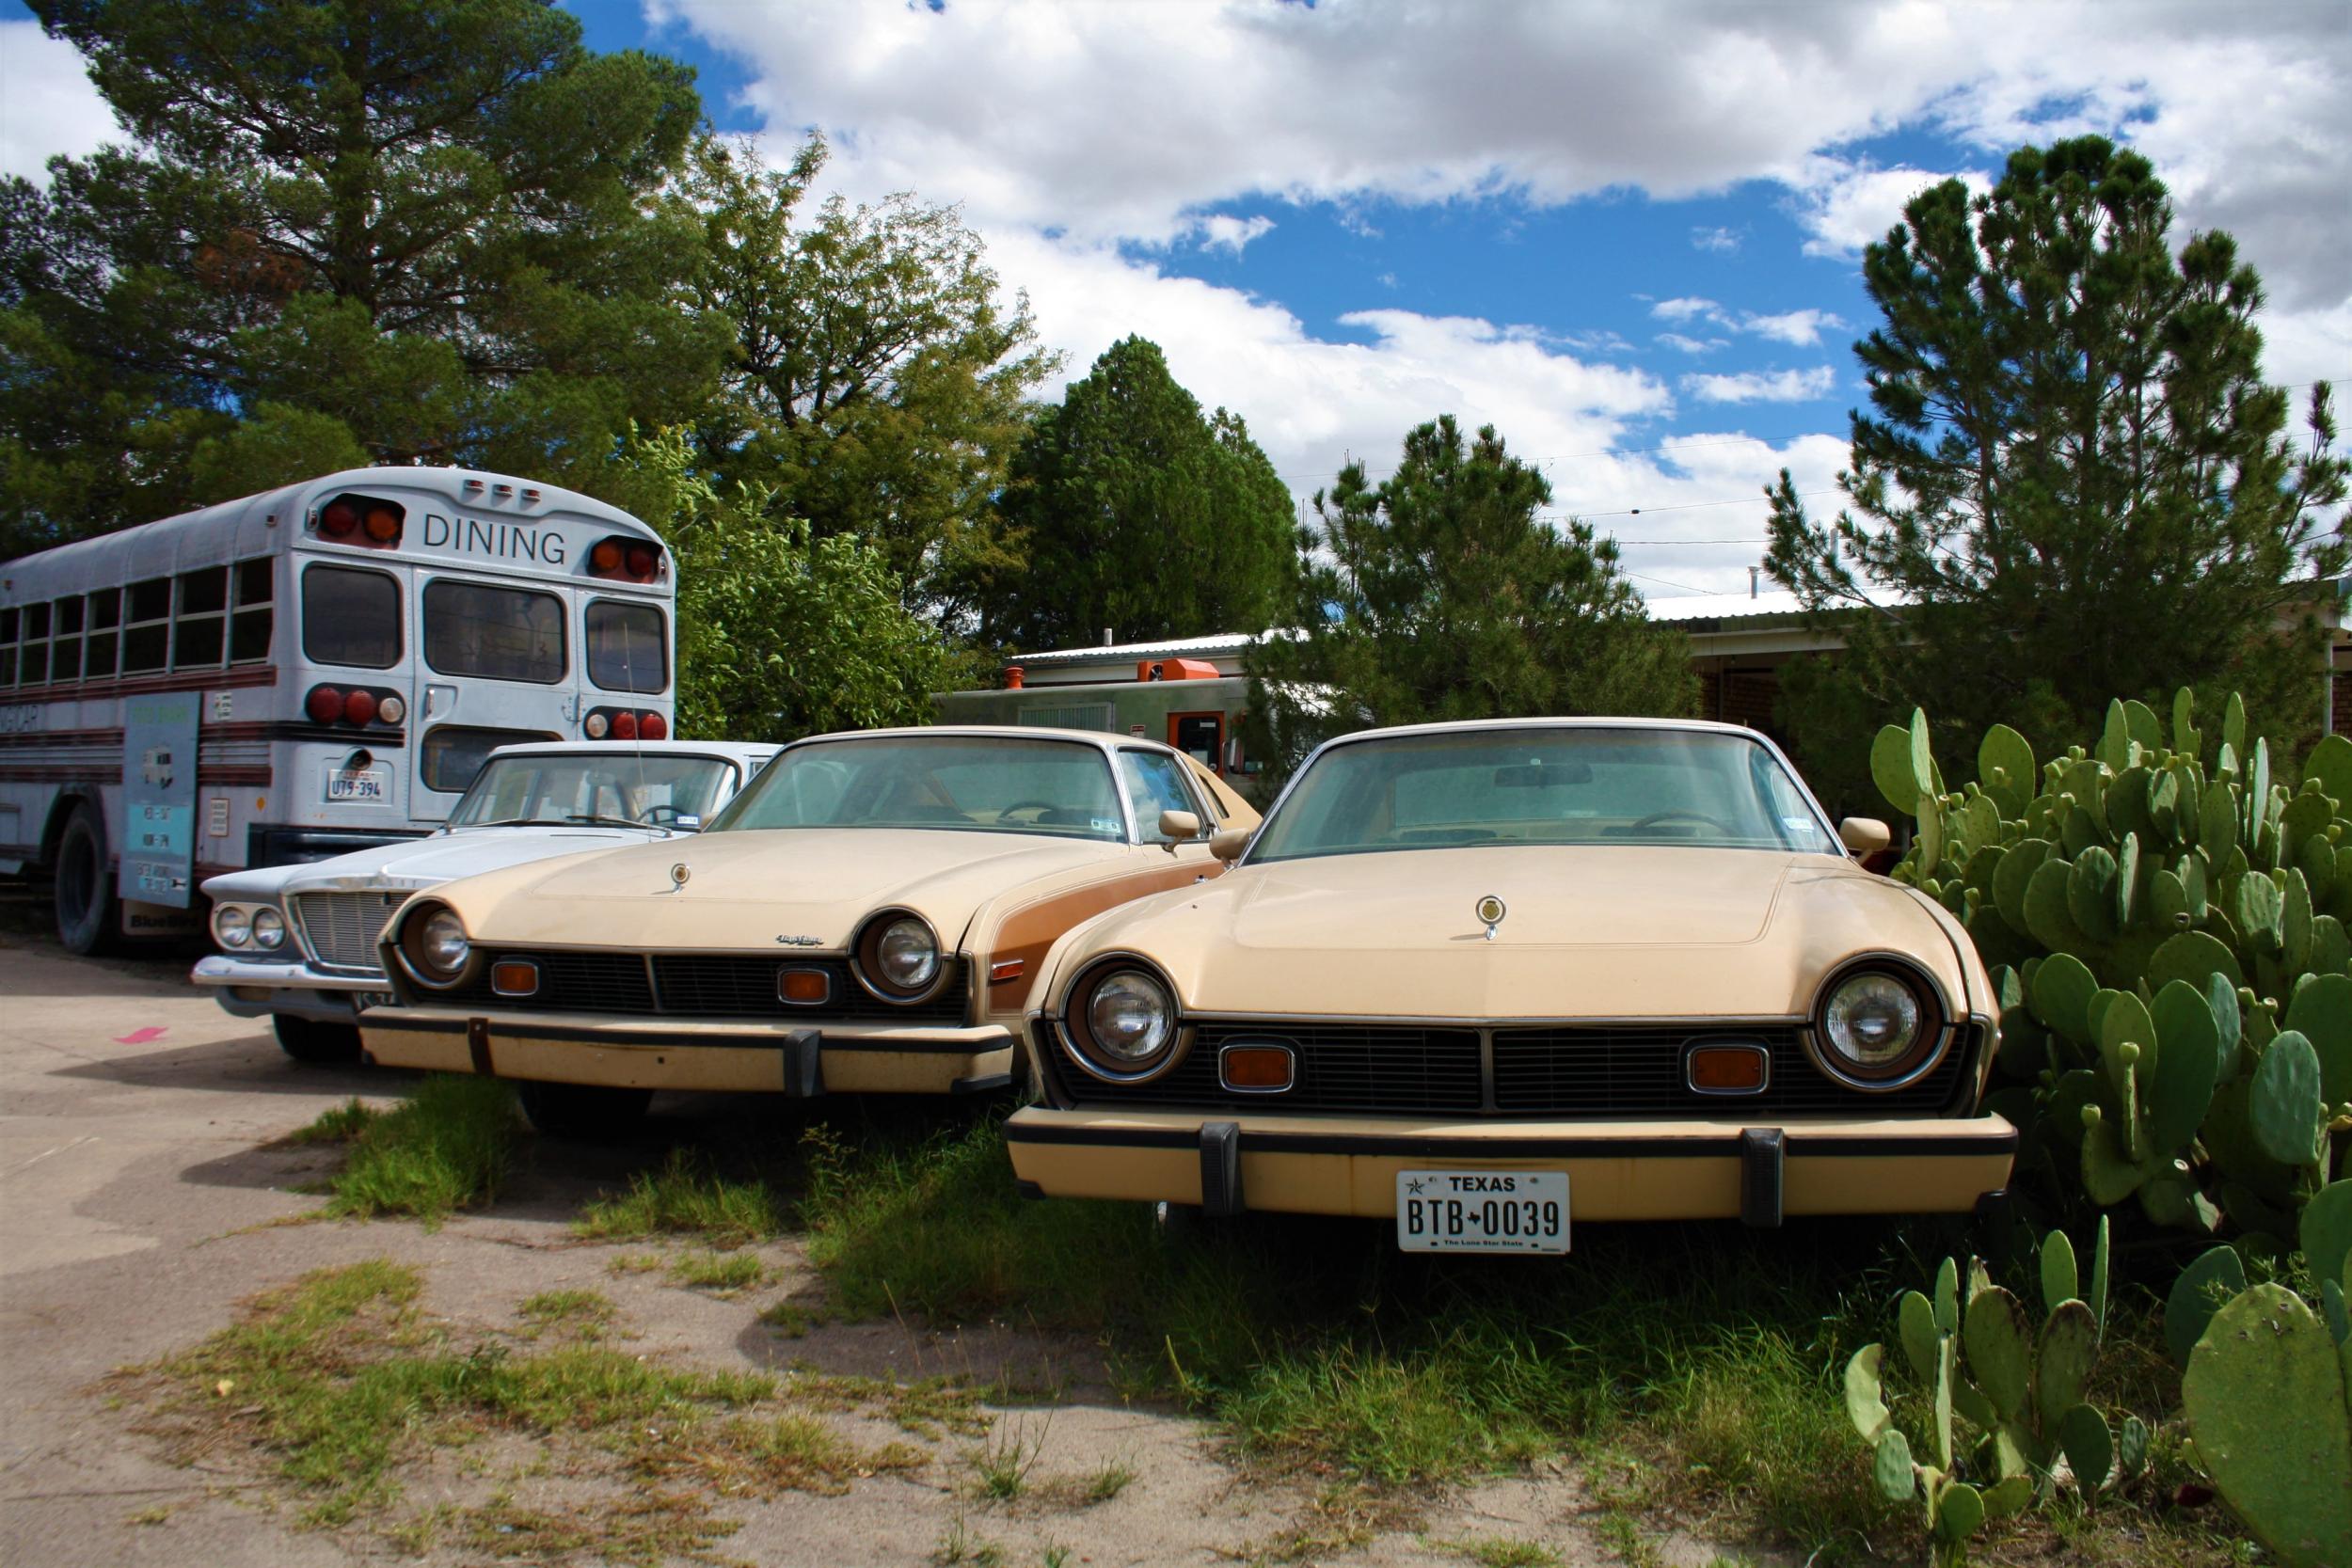 One of Marfa's food trucks has a collection of vintage cars